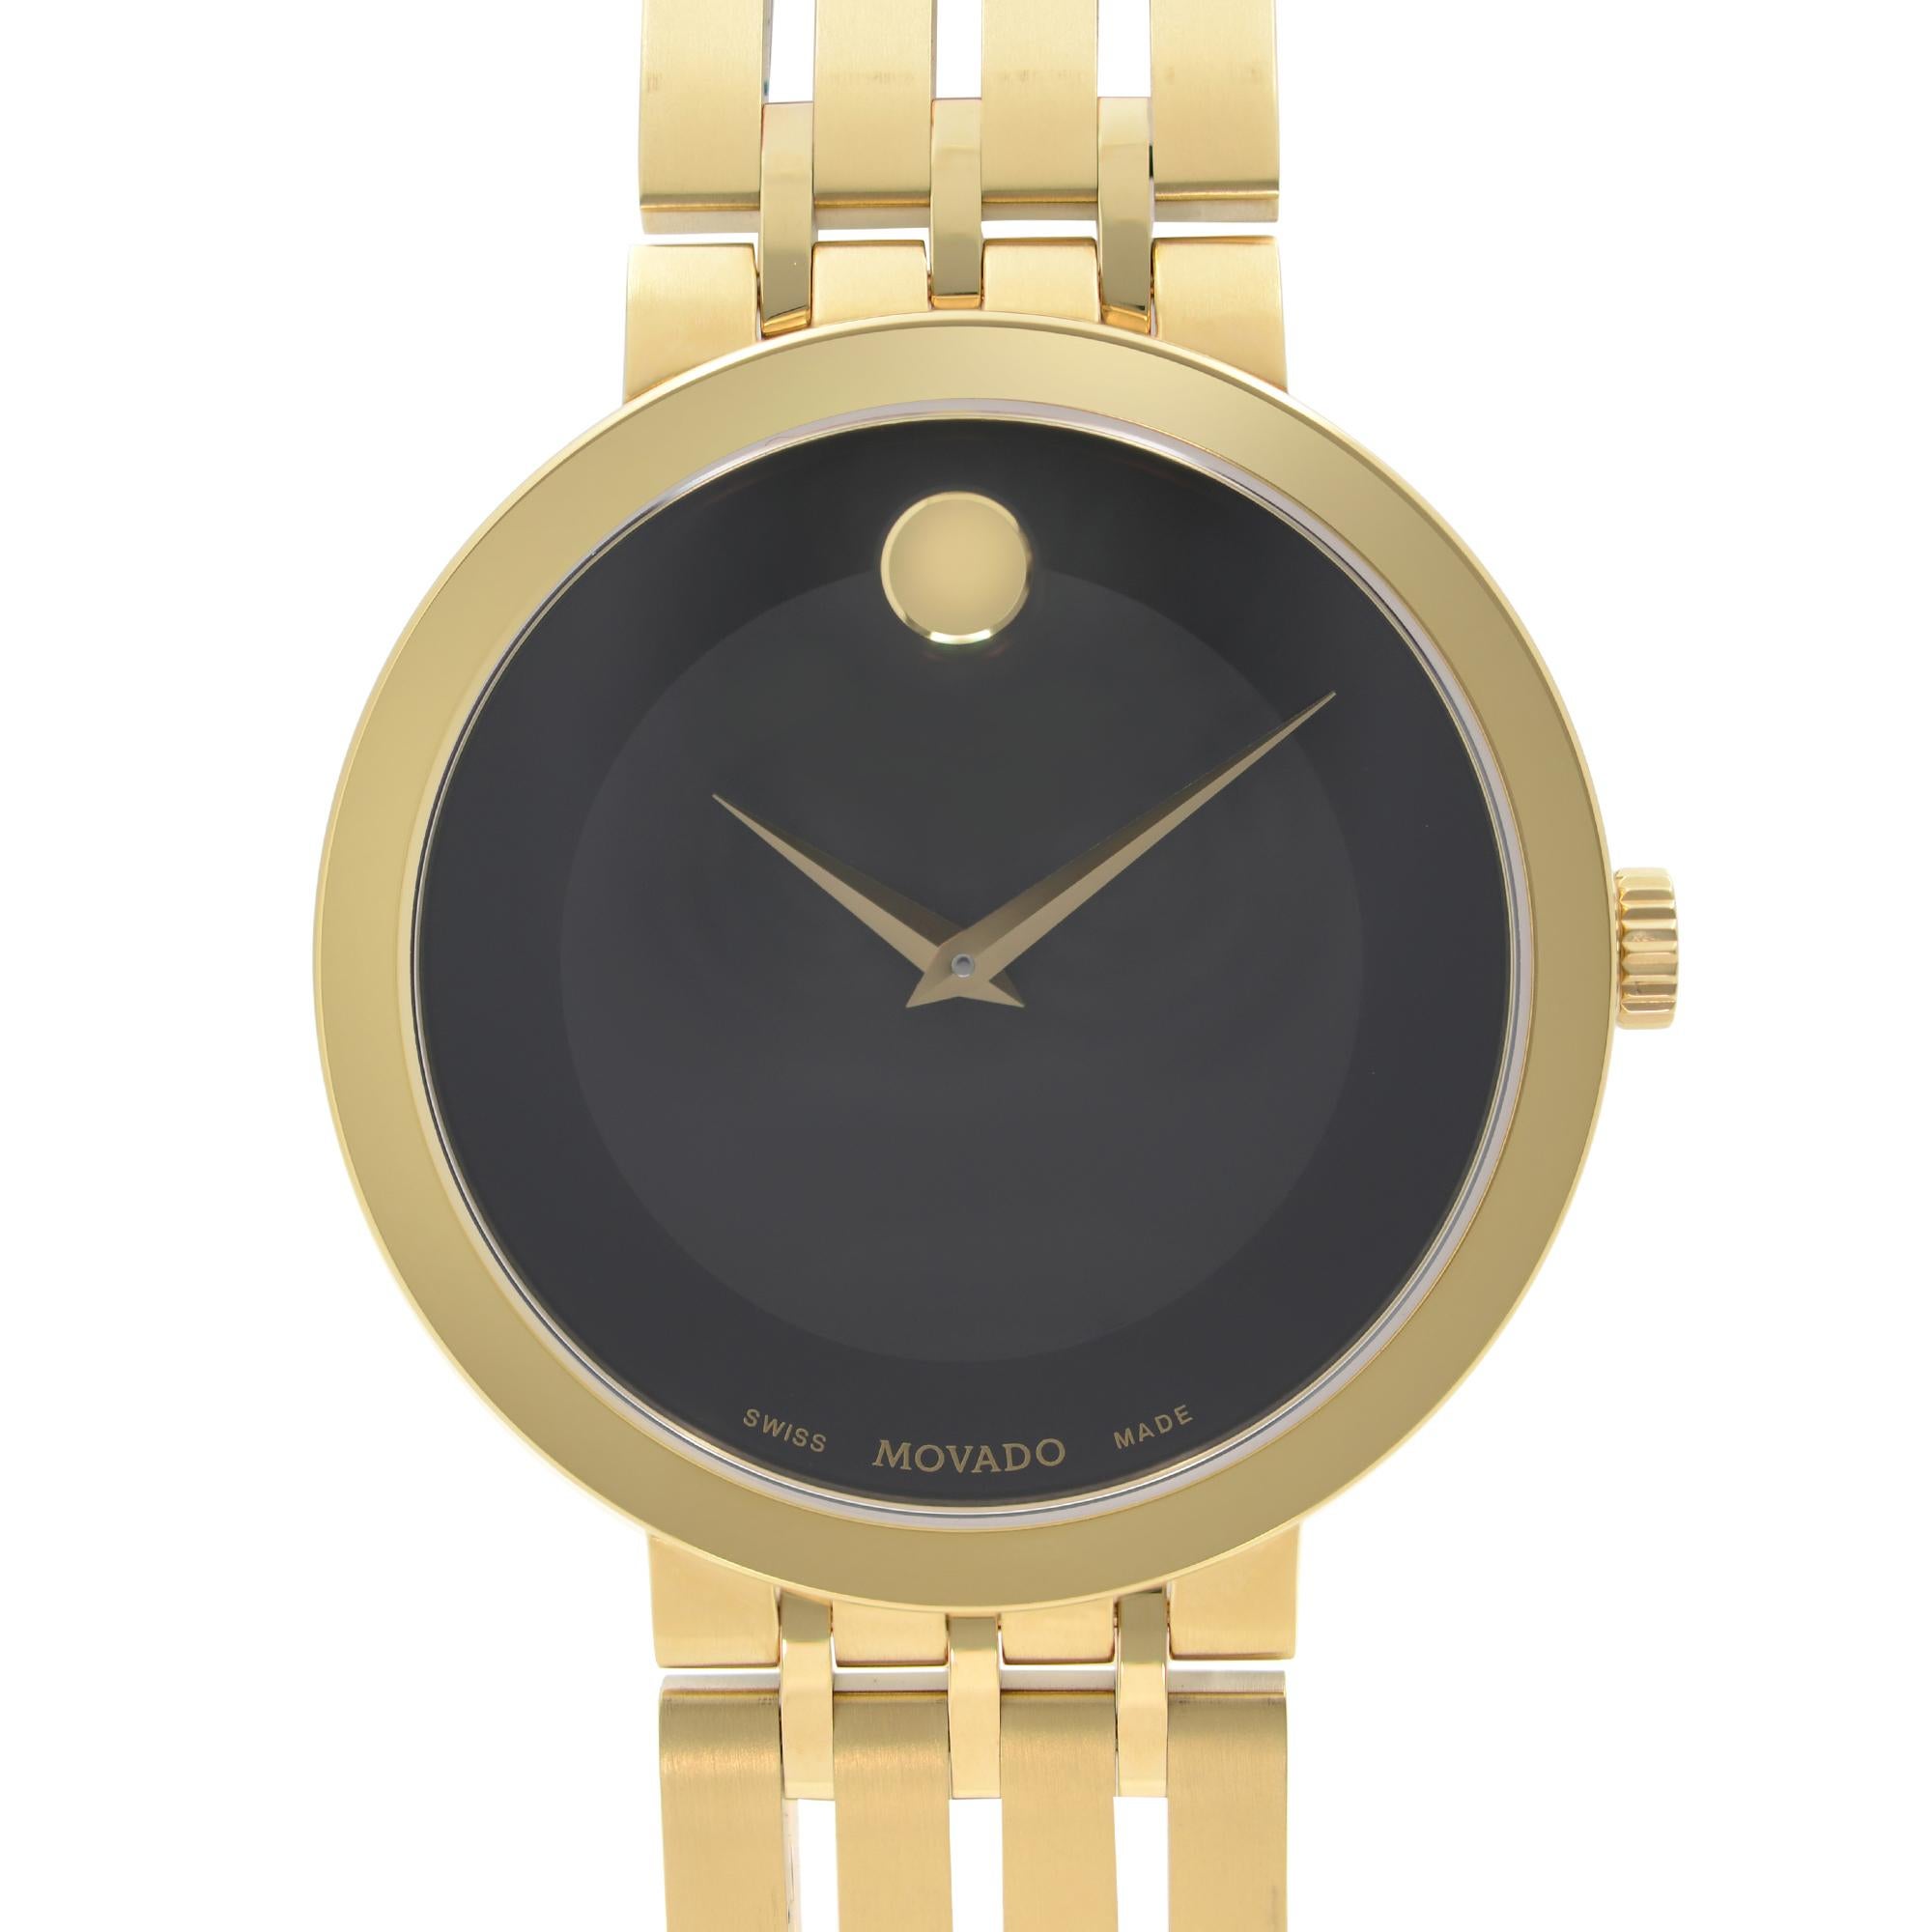 New With Defects Movado Esperanza Museum Gold-Tone Steel Black Dial Men's Watch 0607059. This Beautiful Timepiece Features: Yellow Gold Tone Stainless Steel Case and Bracelet. Fixed Yellow Gold Tone Bezel. Black Dial with Gold Tone Hands. No